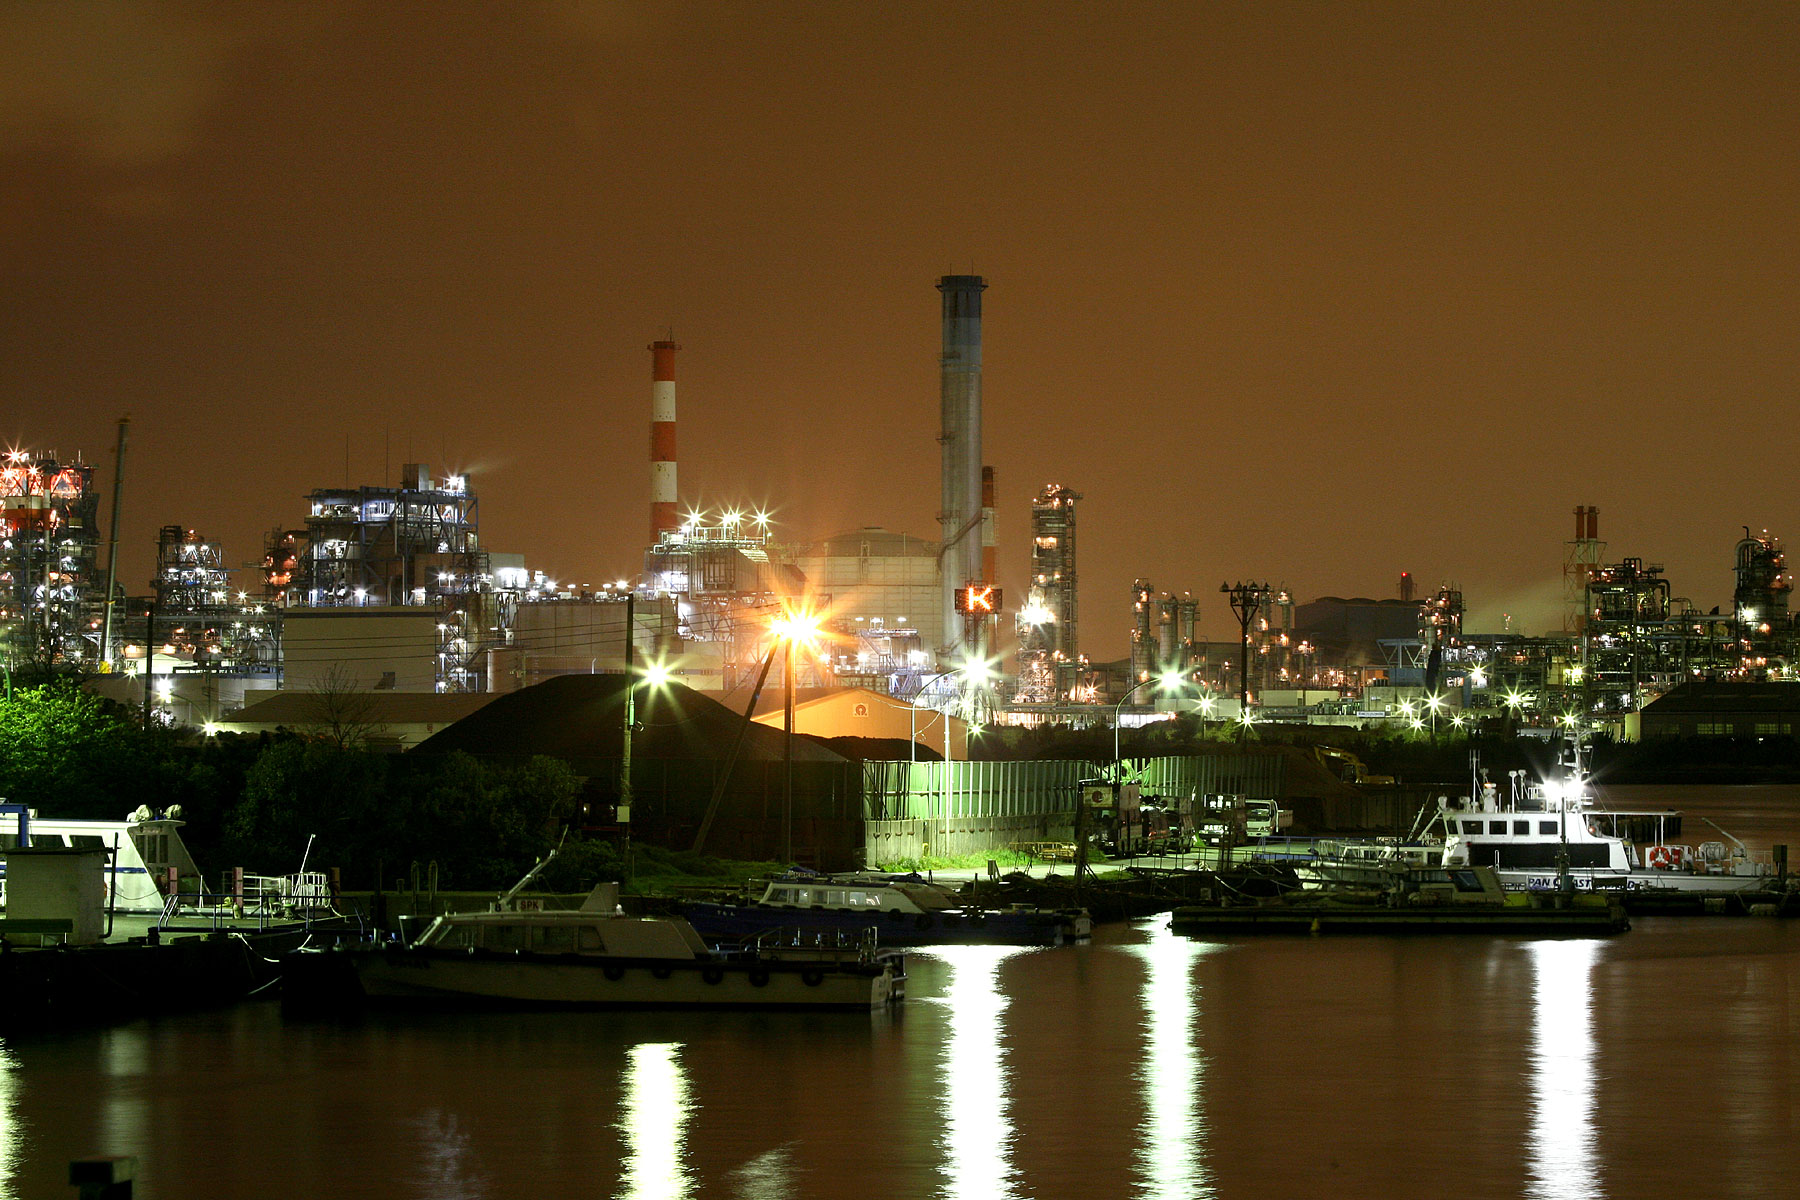 industrial area lit up at night with a boat and other boats in the water